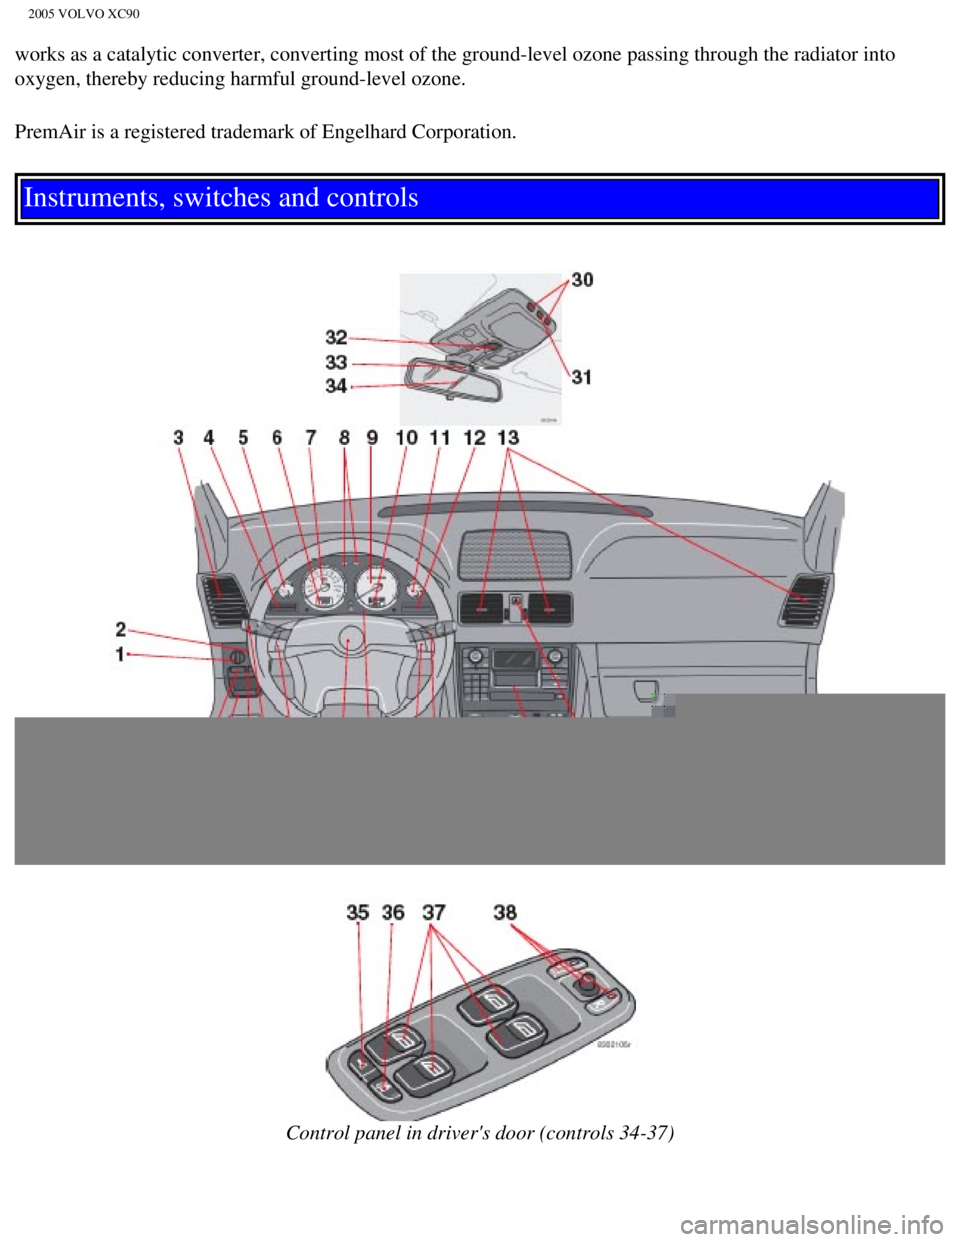 VOLVO XC90 2005  Owners Manual 
2005 VOLVO XC90
works as a catalytic converter, converting most of the ground-level ozon\
e passing through the radiator into 
oxygen, thereby reducing harmful ground-level ozone.
PremAir is a regist